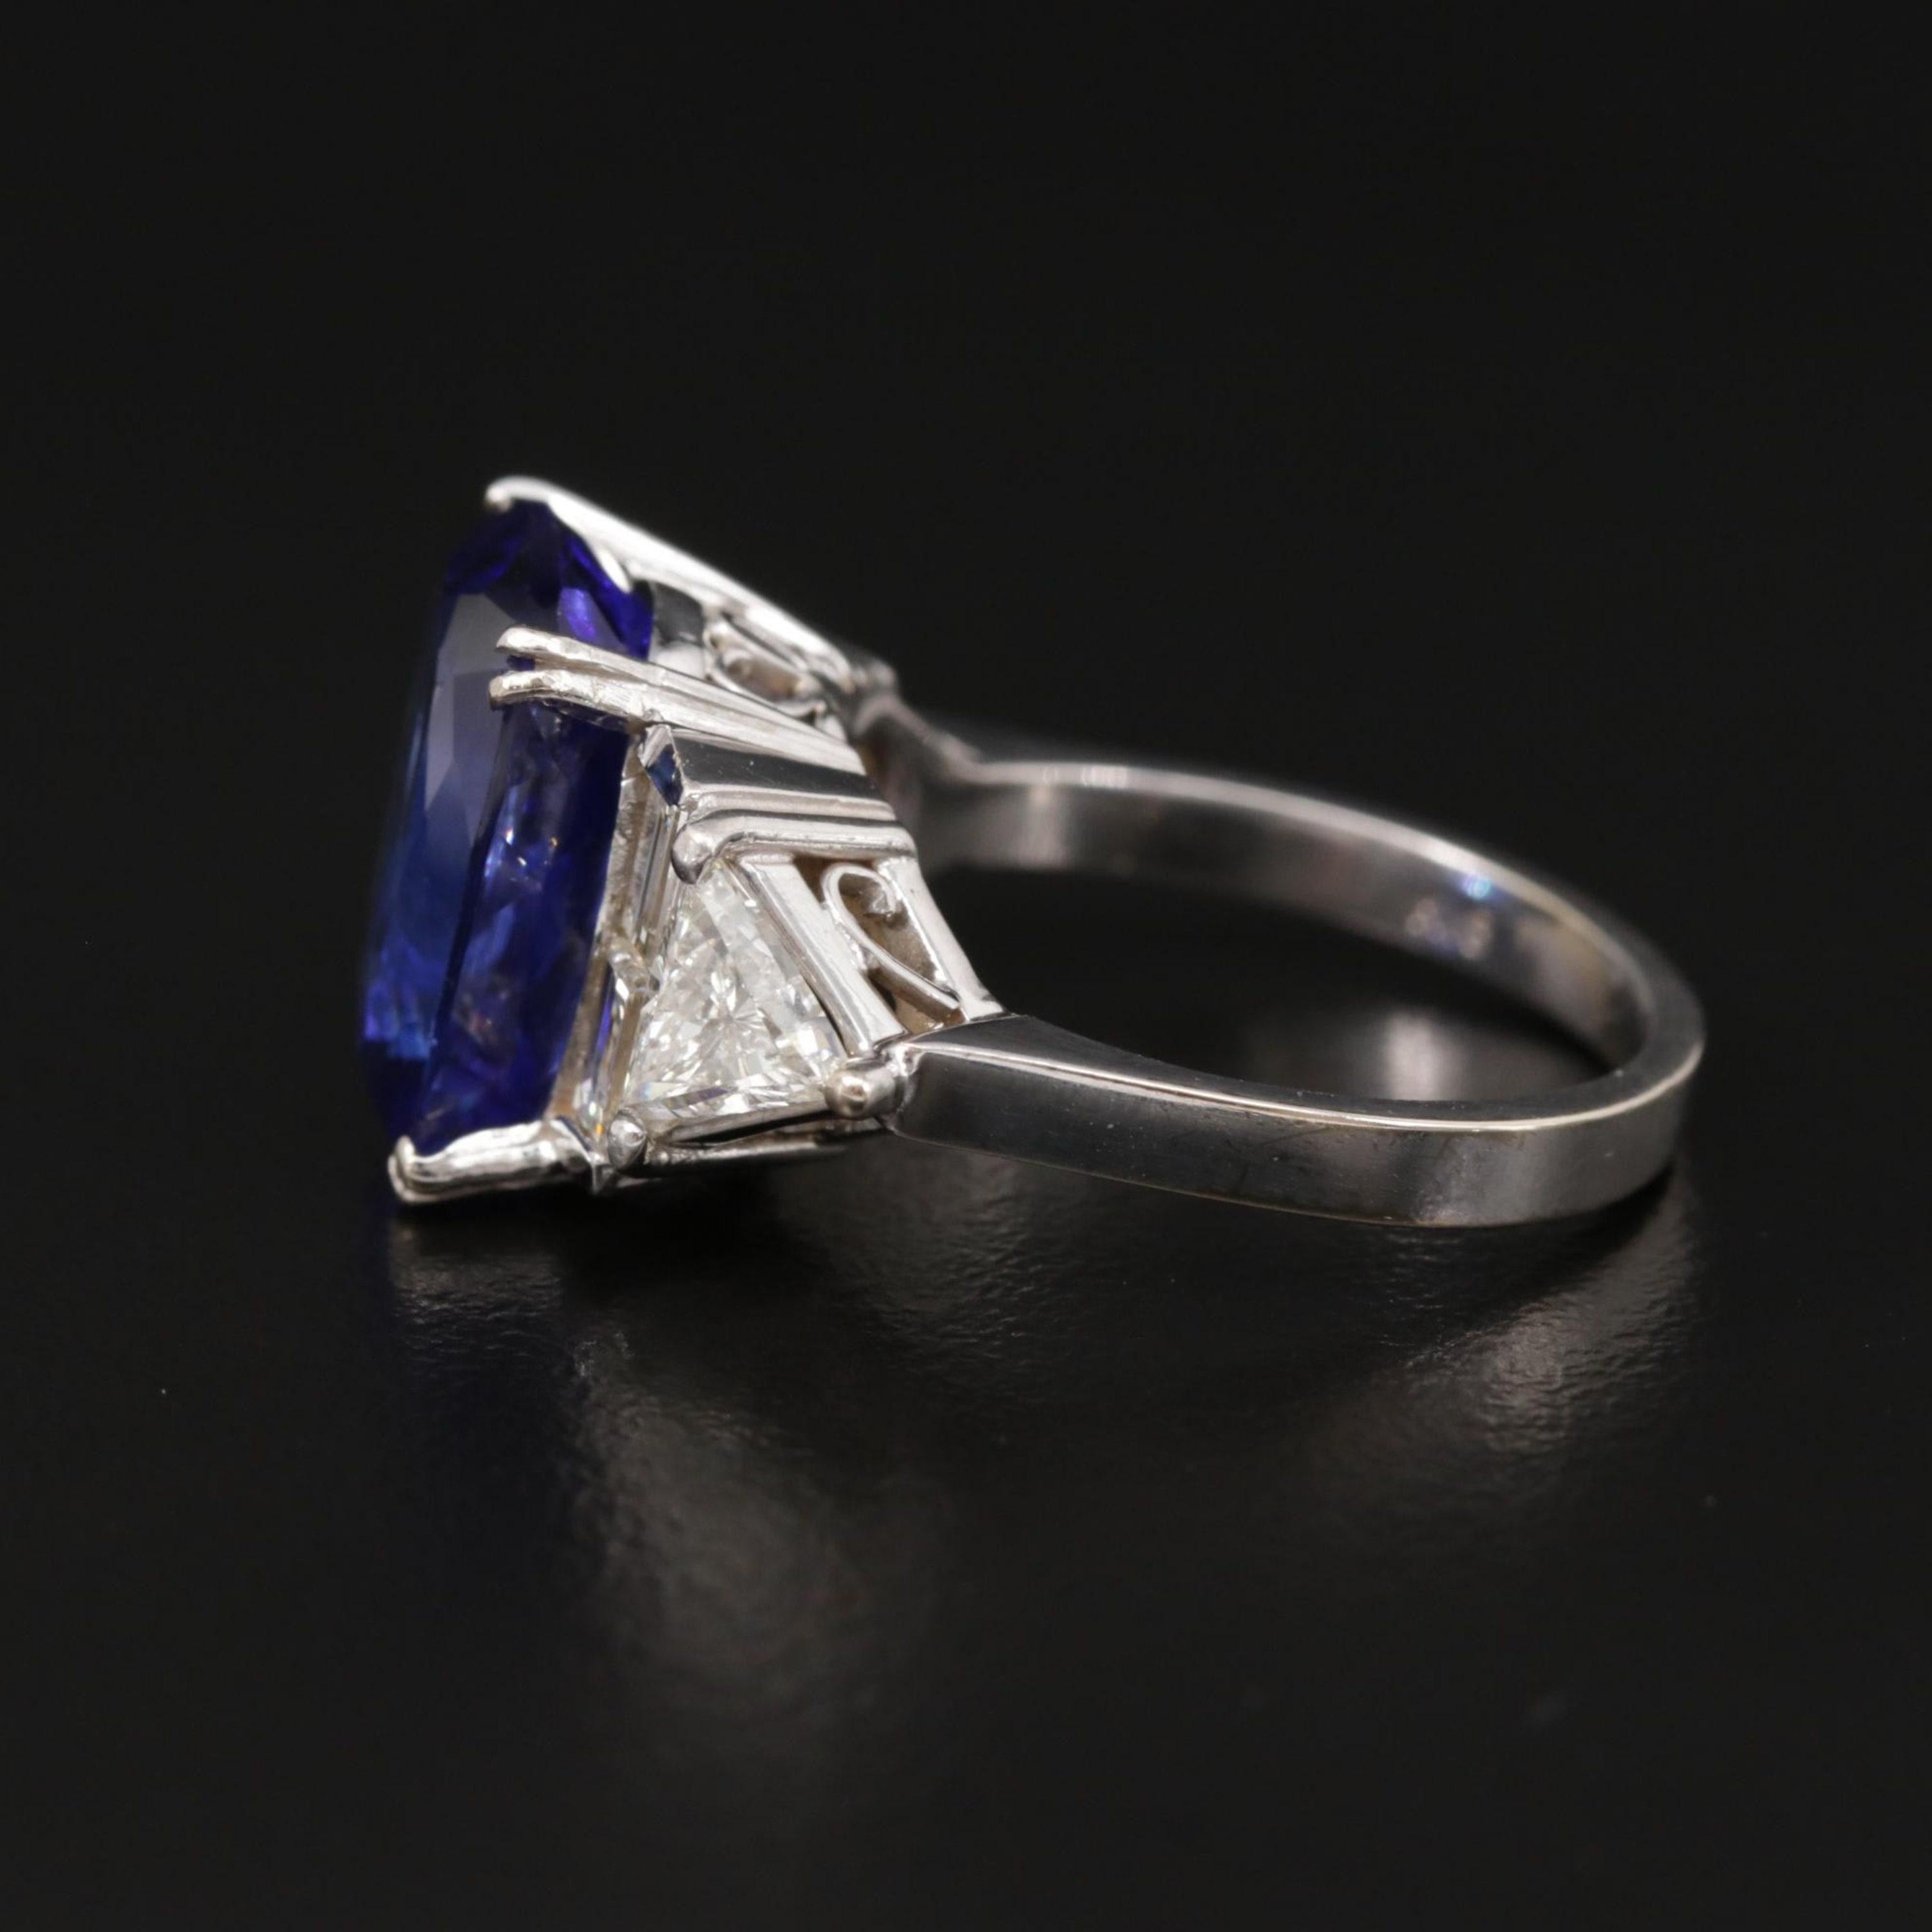 For Sale:  4 Carat Natural Sapphire Diamond Engagement Ring Set in 18K Gold, Cocktail Ring 4